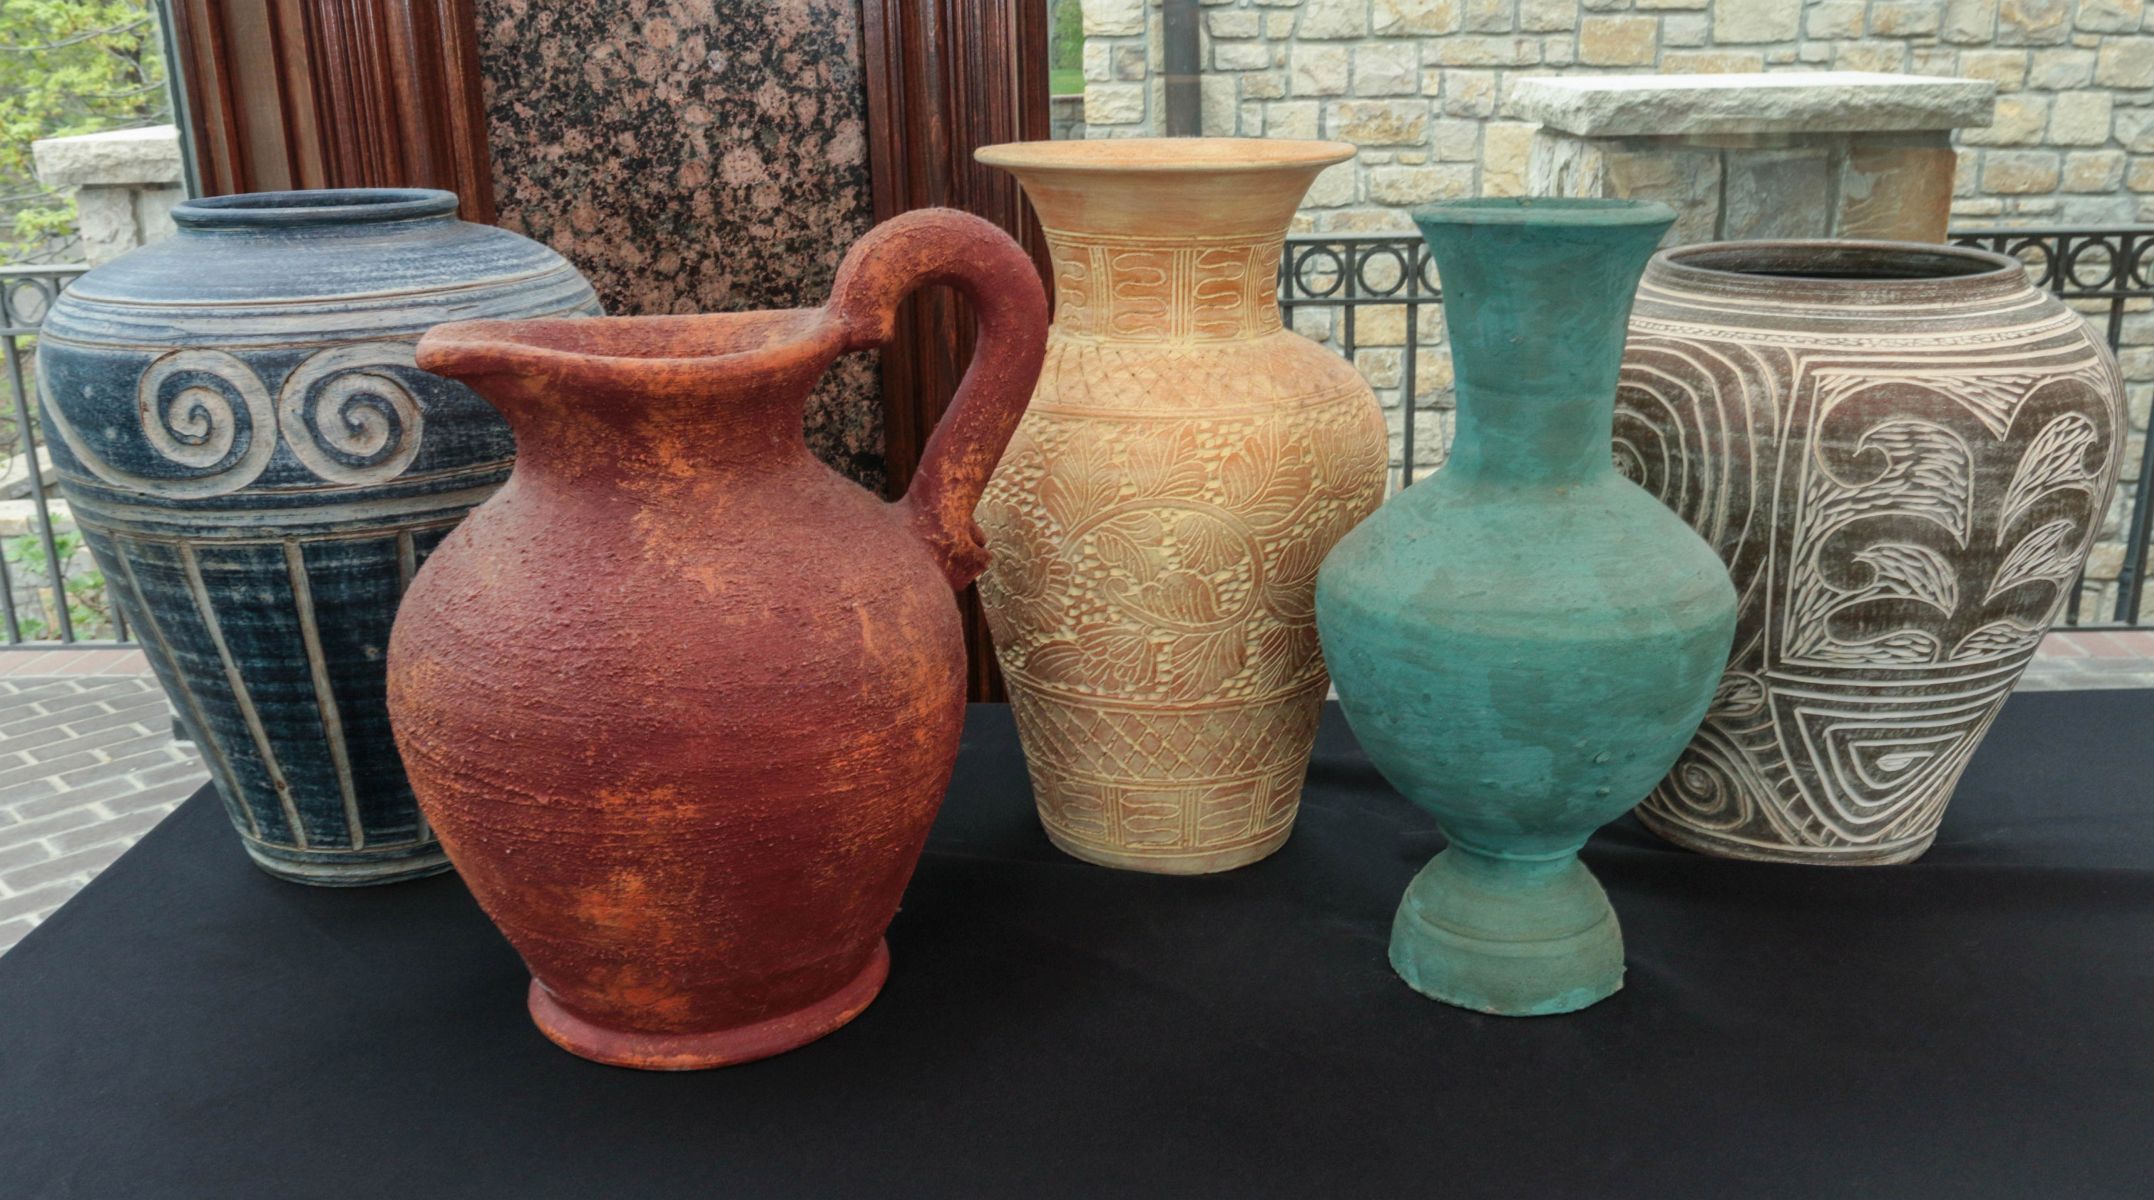 A COLLECTION OF ETHNIC POTTERY VESSELS